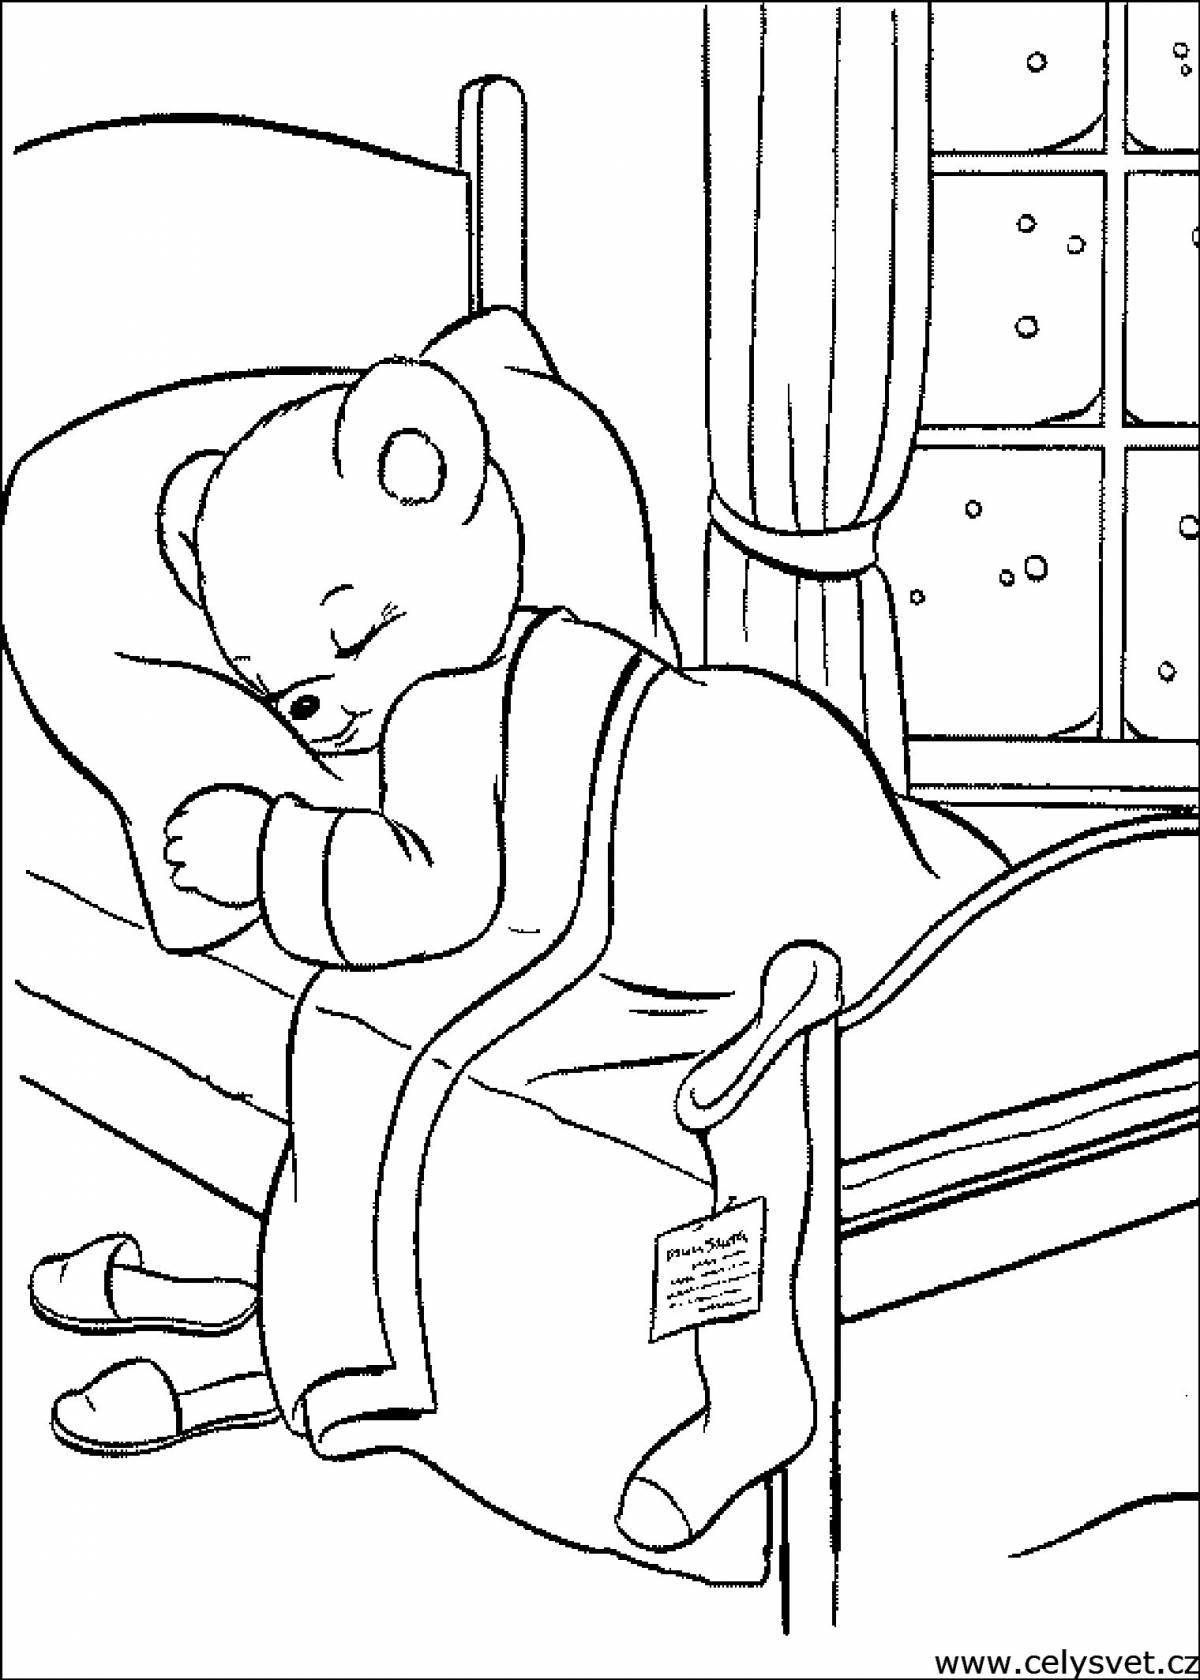 Cute bear coloring under the covers